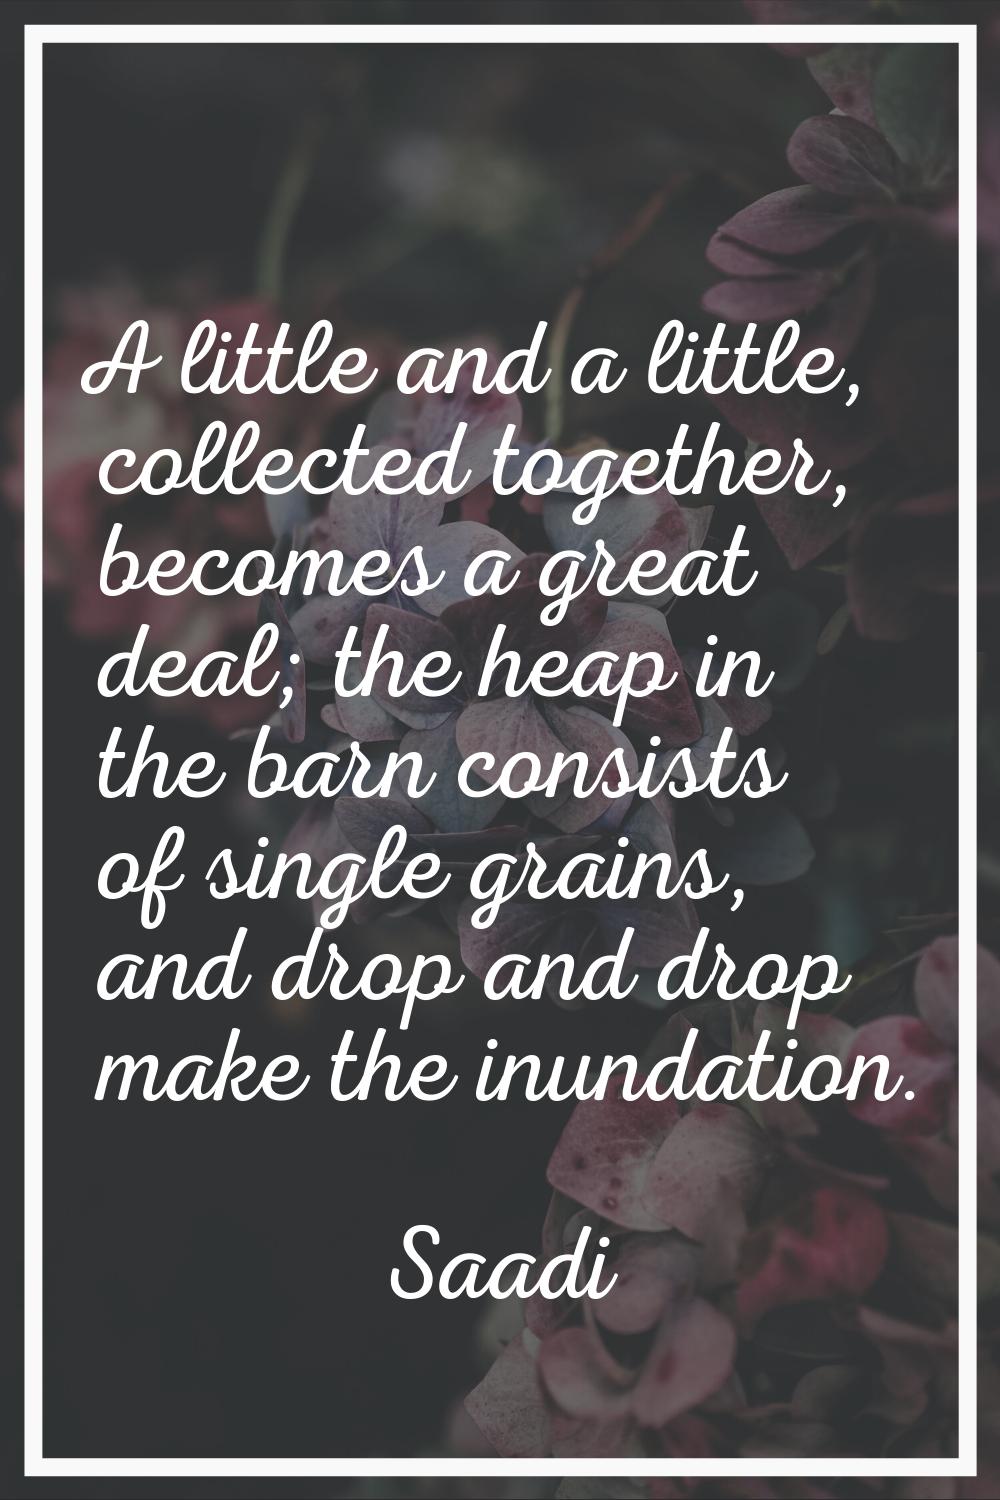 A little and a little, collected together, becomes a great deal; the heap in the barn consists of s